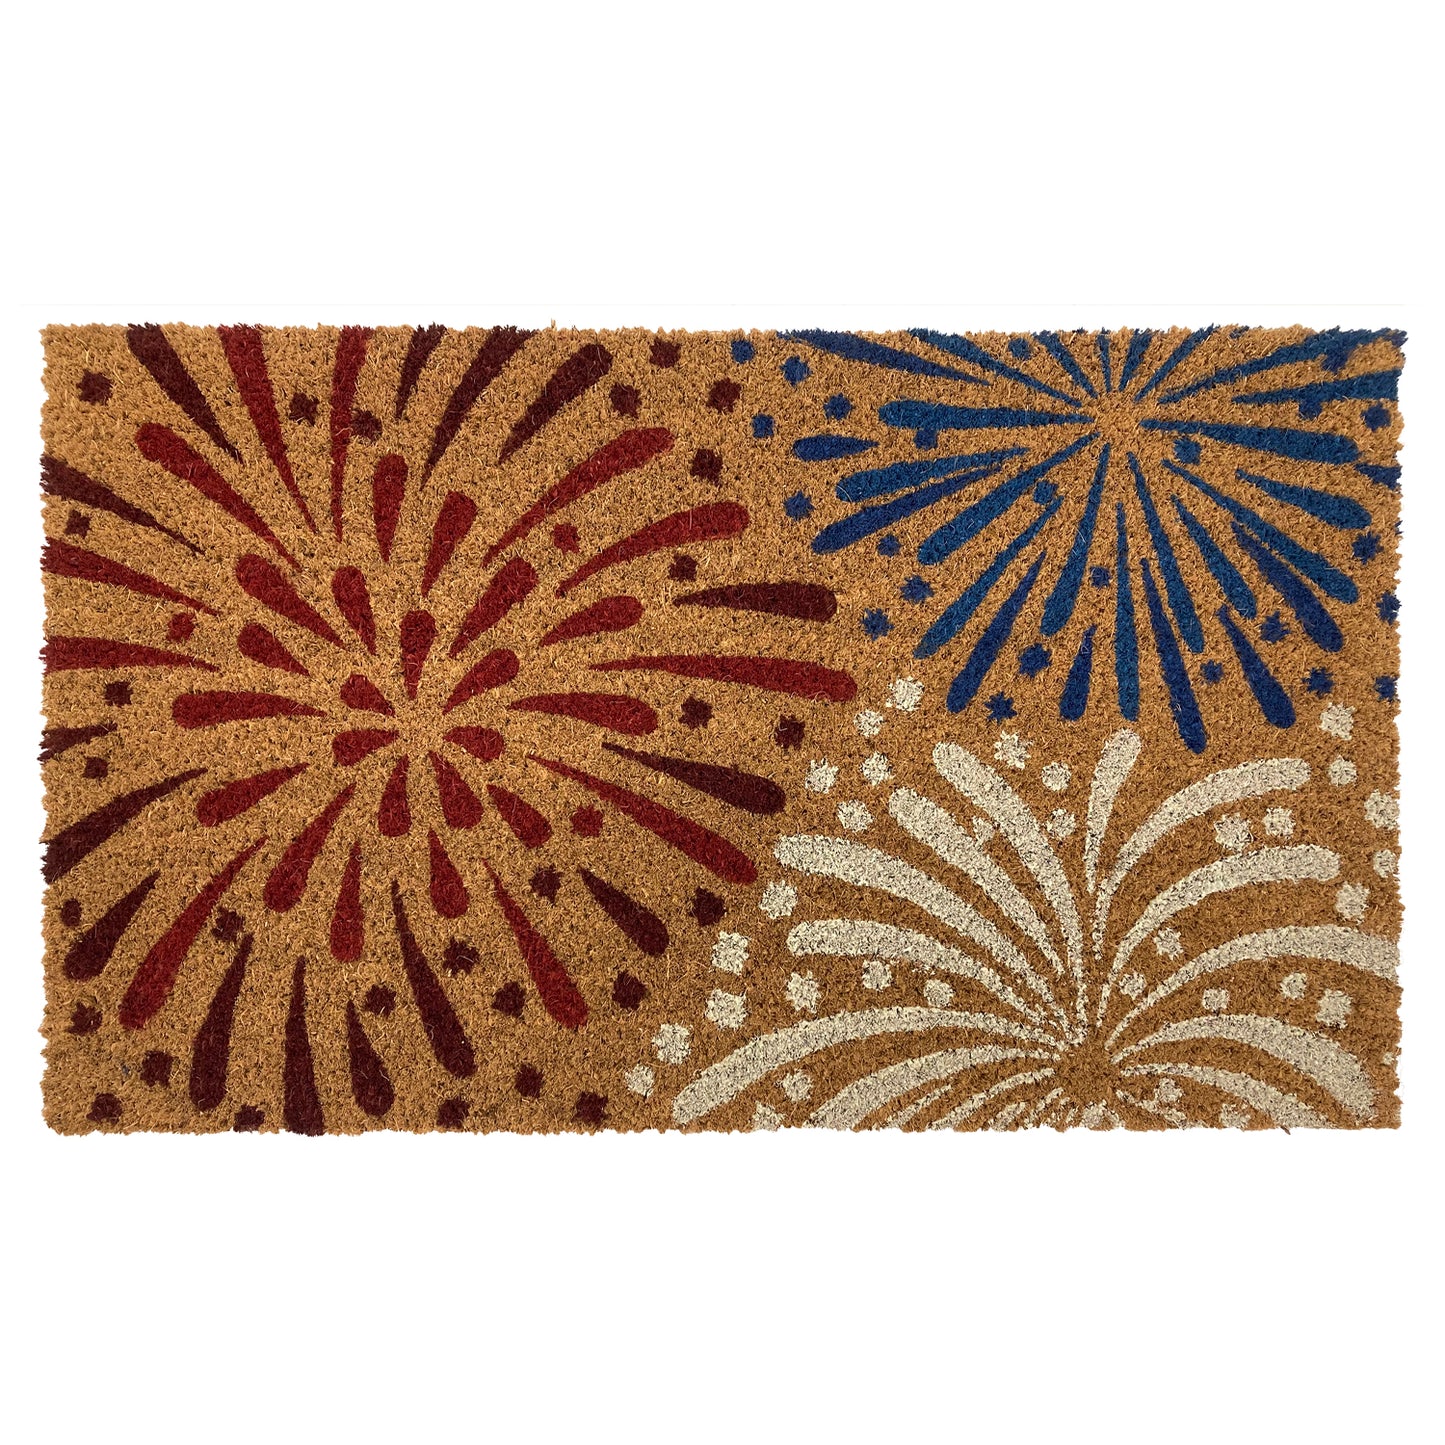 Avera Products Fireworks 4th of July Holiday Summer Doormat